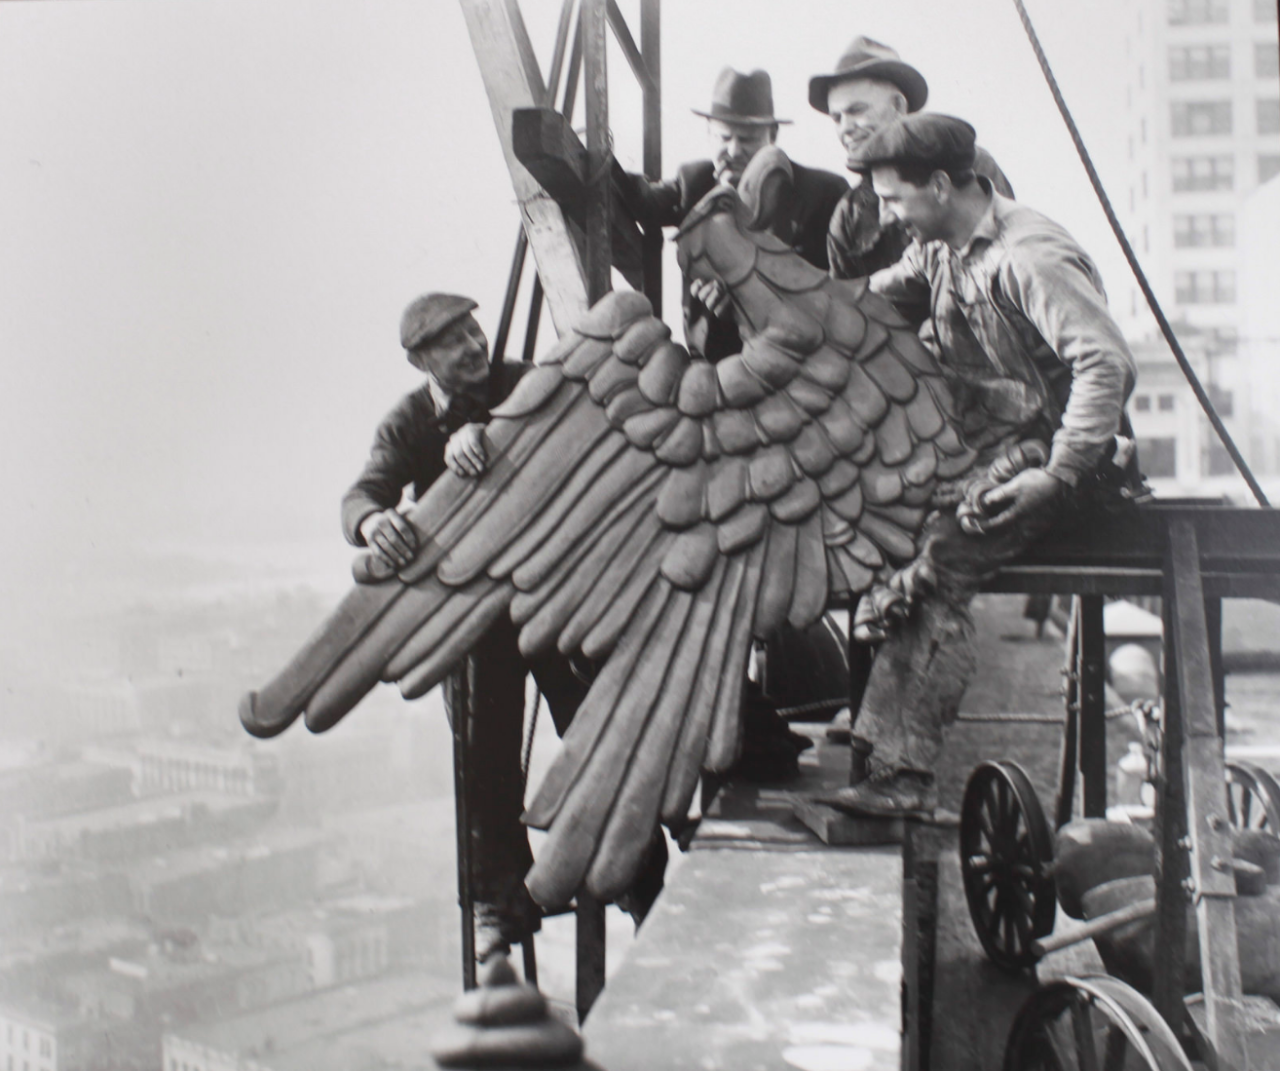 Workmen adjust the eagle ornament atop the City-County Building, Seattle, March 7, 1937